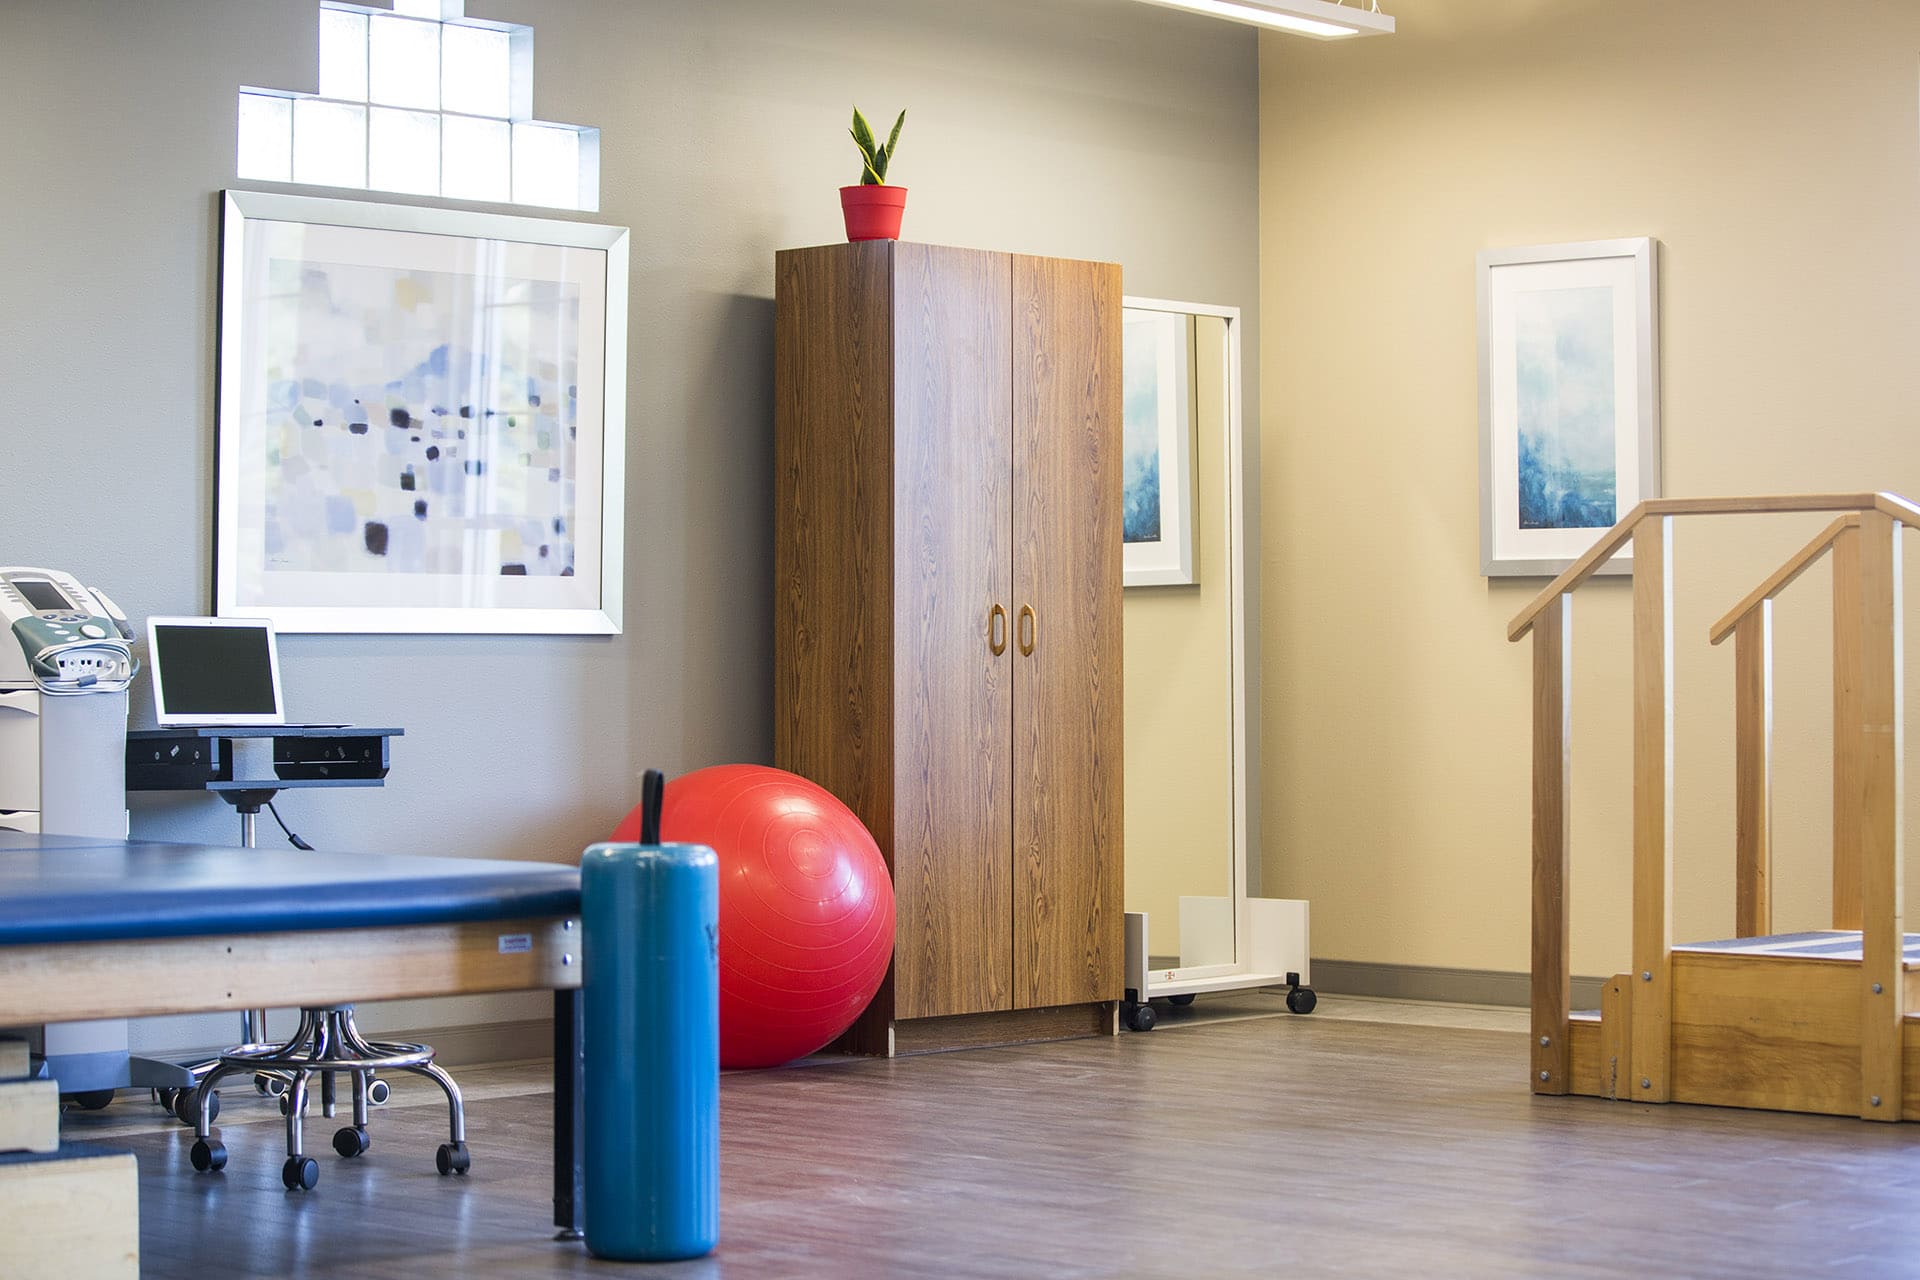 Flagstaff Location gym & physical therapy room